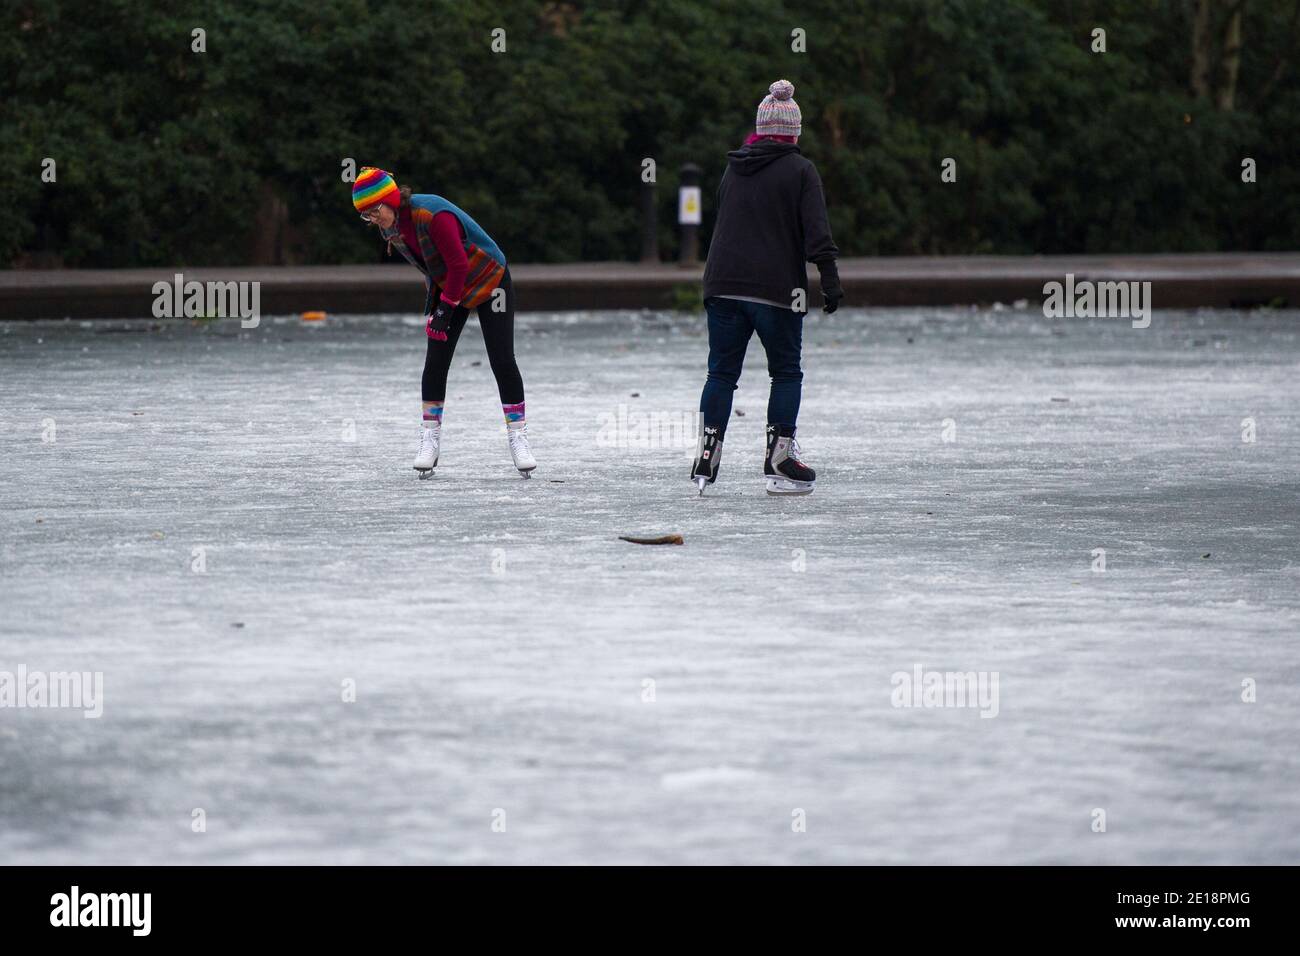 Glasgow, Scotland, UK. 5 January 2021. Pictured: Skaters on the pond ice. Queens Park in Shawlands, this morning showing only a few people around the park and on the ice, form a marked contrast to the scenes yesterday which saw hundreds of people on the ice, skating, playing hockey and around the park. As of 00:01 this morning Scotland has been placed into another lockdown as per the Scottish First Minister's address at 2pm yesterday. Credit: Colin Fisher/Alamy Live News. Stock Photo